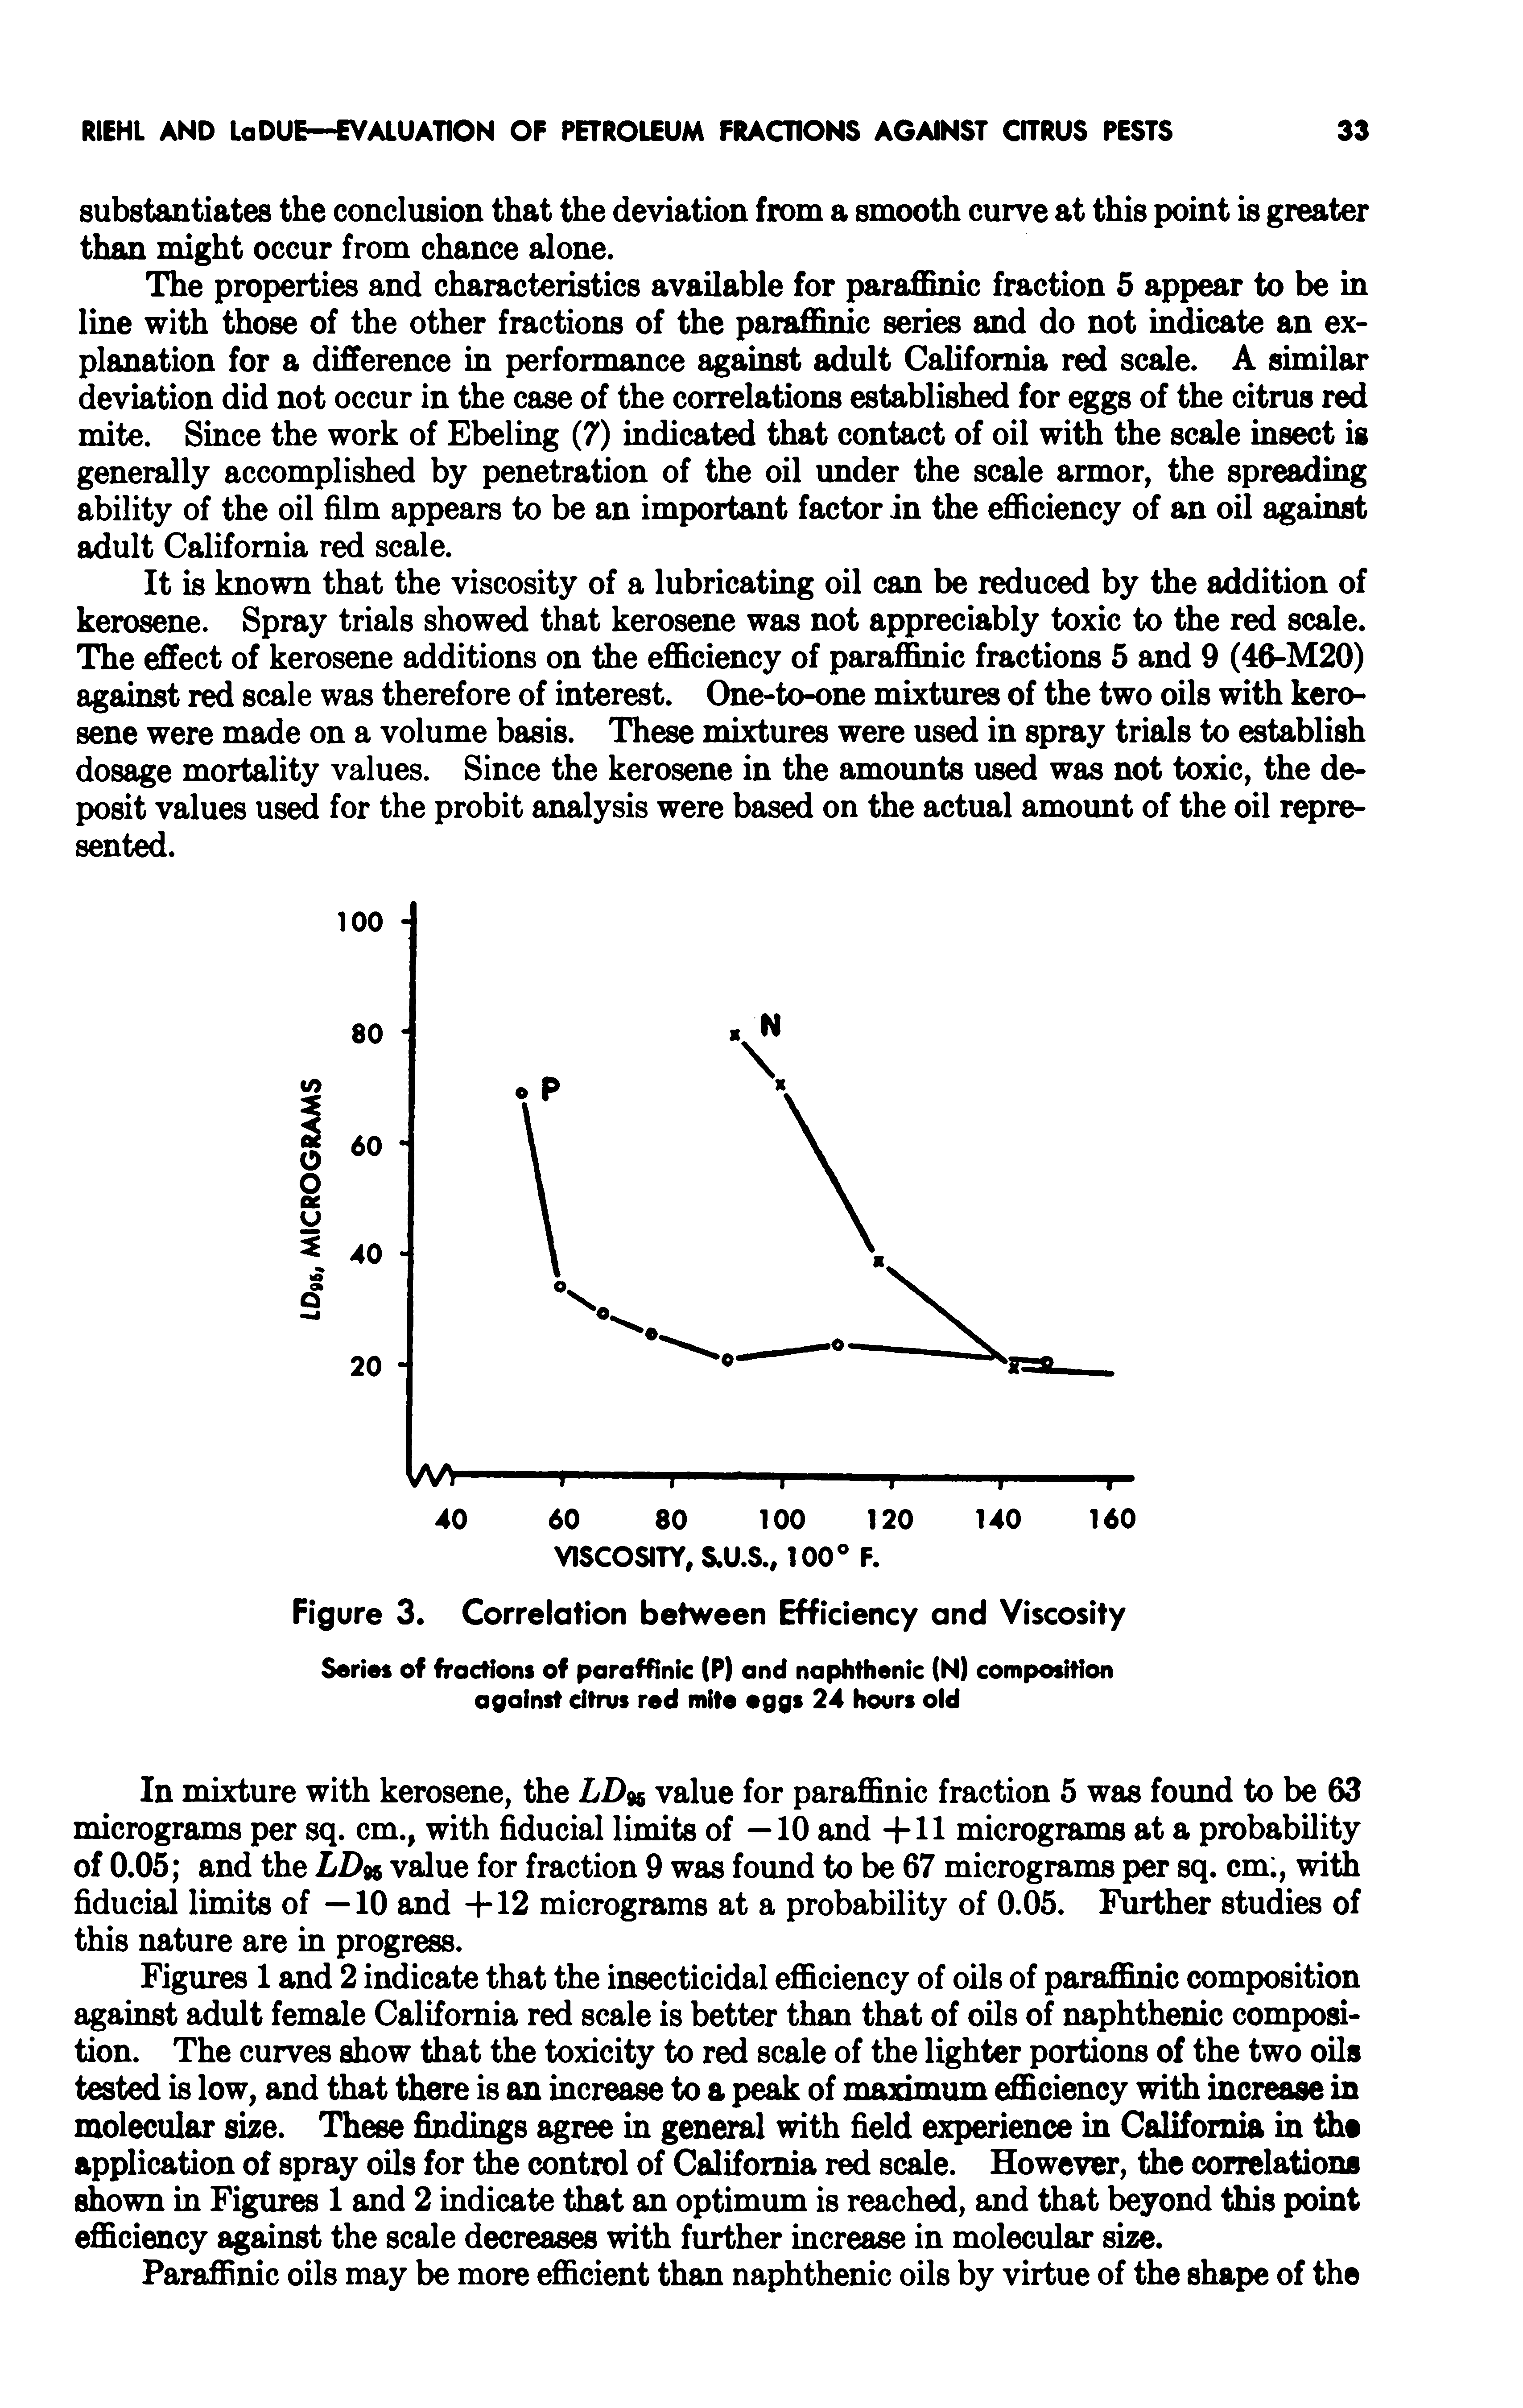 Figures 1 and 2 indicate that the insecticidal efficiency of oils of paraflSnic composition against adult female California red scale is better than that of oils of naphthenic composition. The curves show that the toxicity to red scale of the lighter portions of the two oils tested is low, and that there is an increase to a peak of maximum efficiency with increase in molecular size. These findings agree in general with field experience in California in ths application of spray oils for the control of California red scale. However, the correlations shown in Figures 1 and 2 indicate that an optimum is reached, and that beyond this point efficiency against the scale decreases with further increase in molecular size.